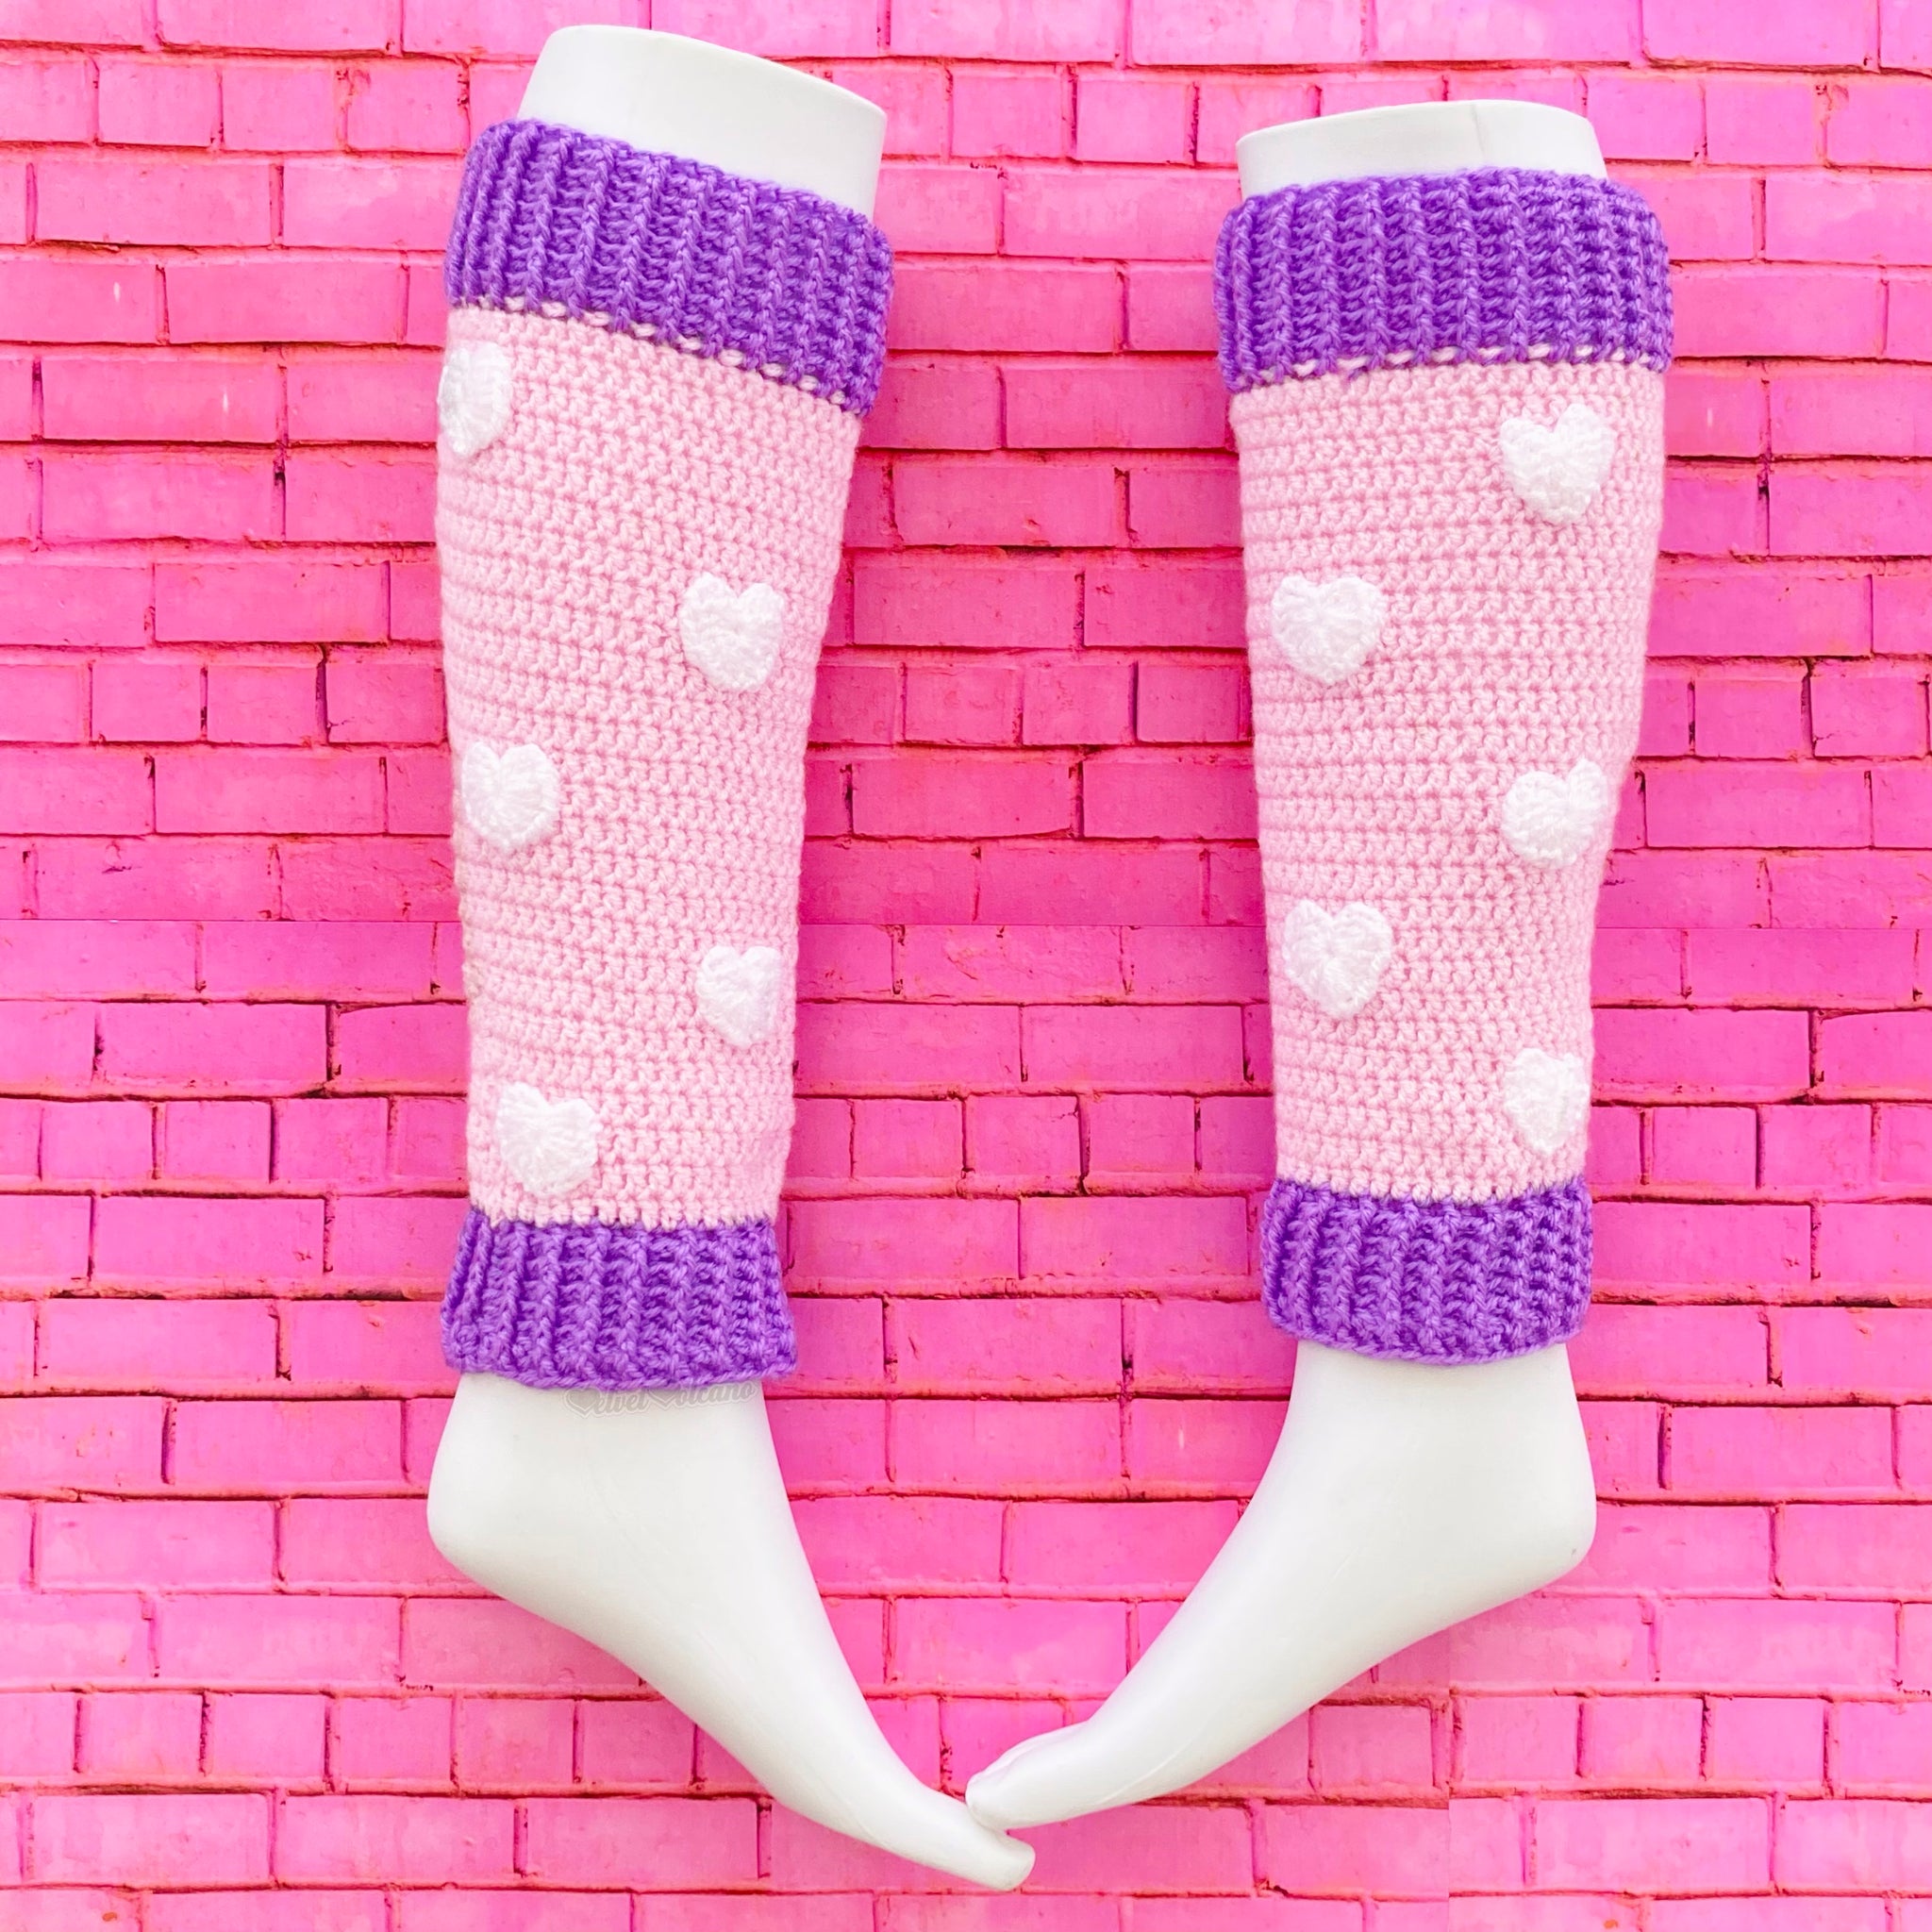 Victorian Style Leg Warmers Crochet and Lace Spats in Hot Pink Kawaii  Fashion Accessories Lots of Colors -  Canada